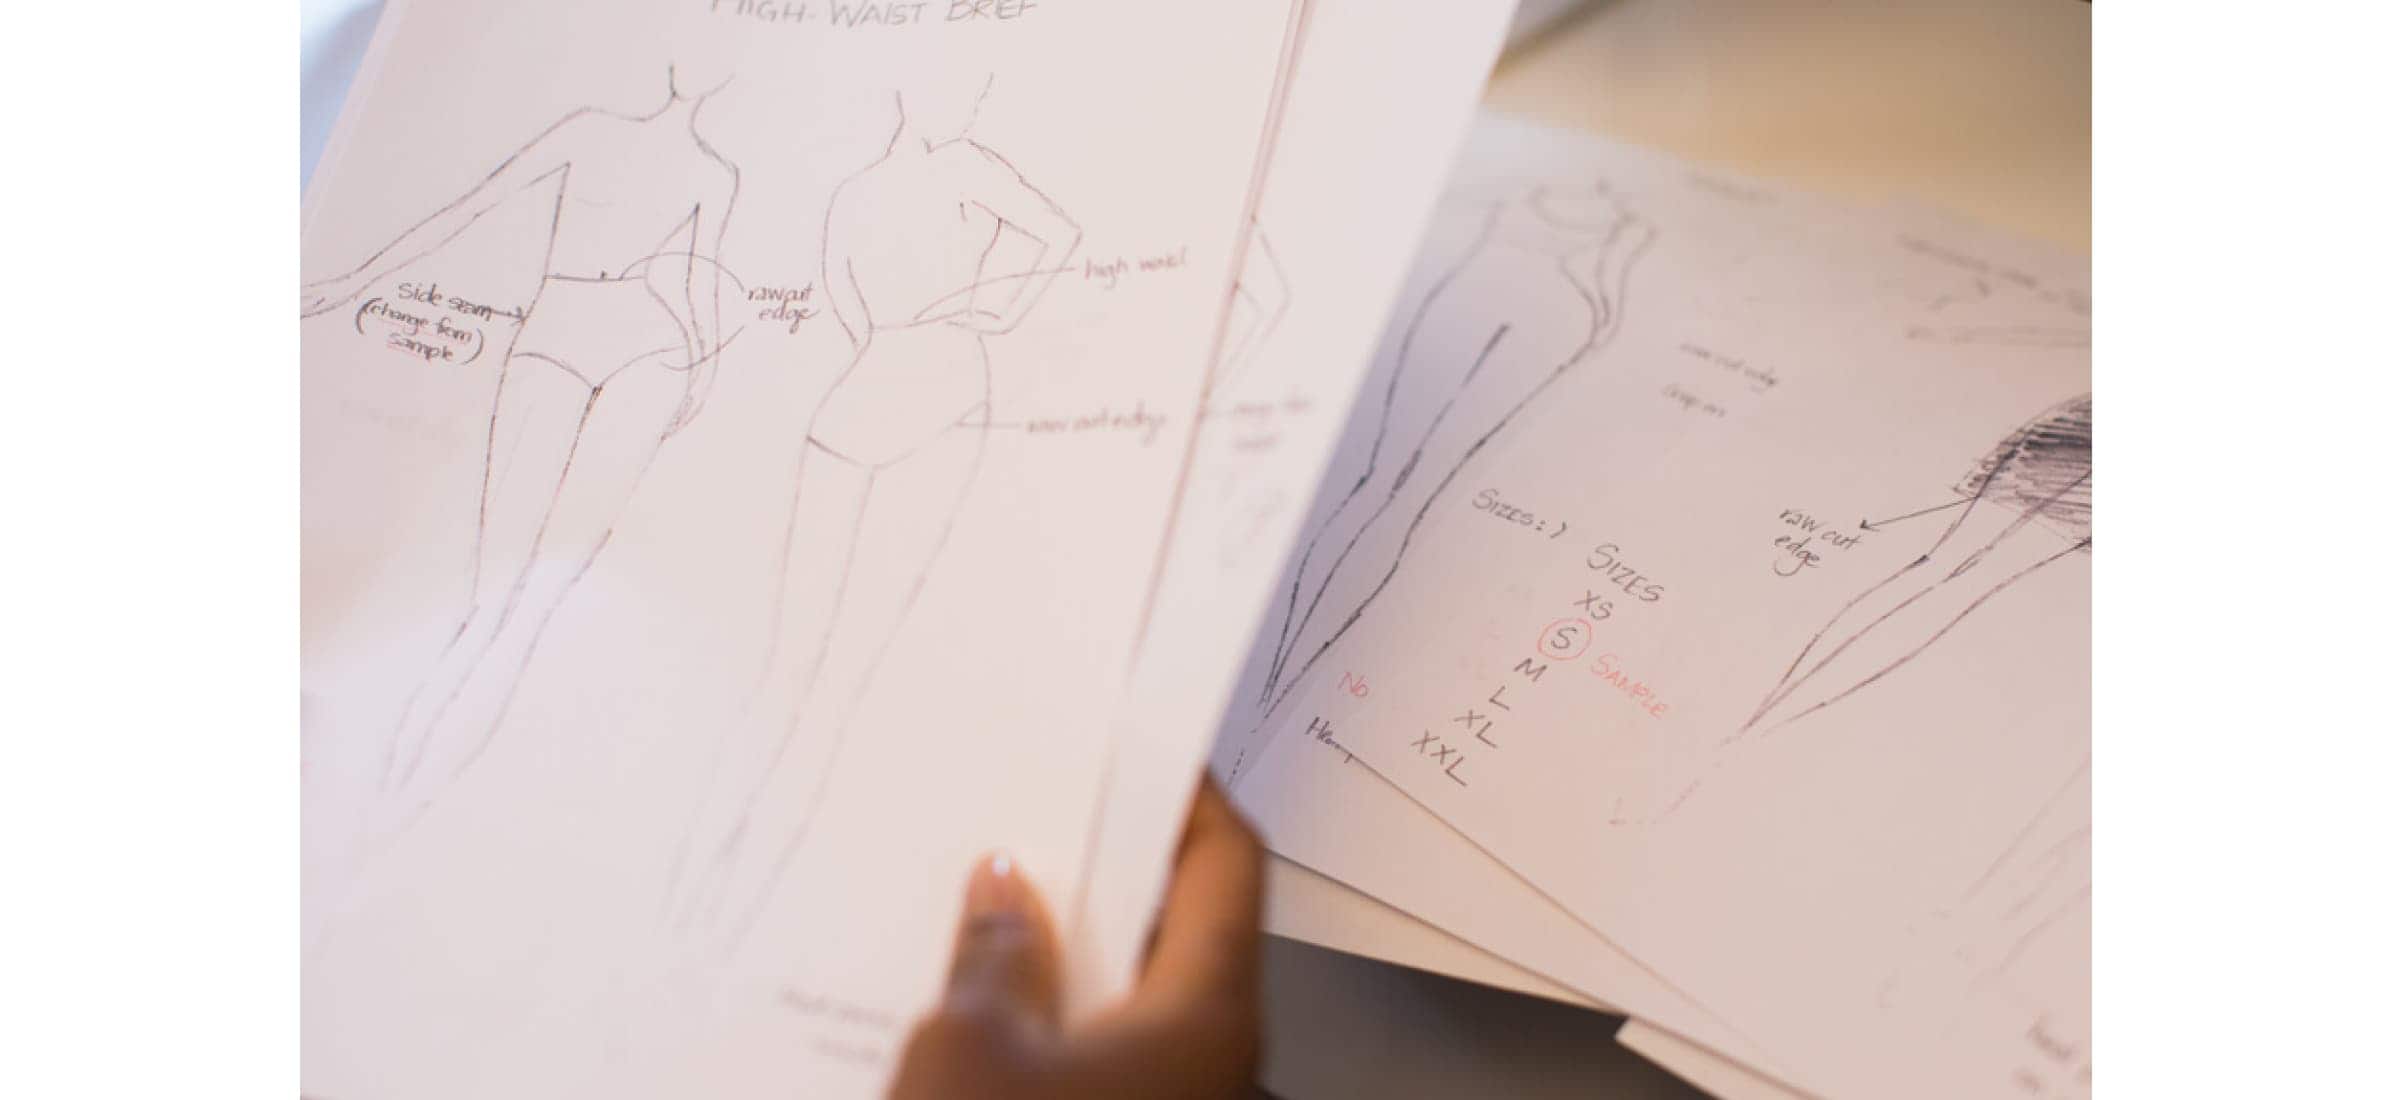 A hand holding pieces of paper with sketches of clothing designs on them.